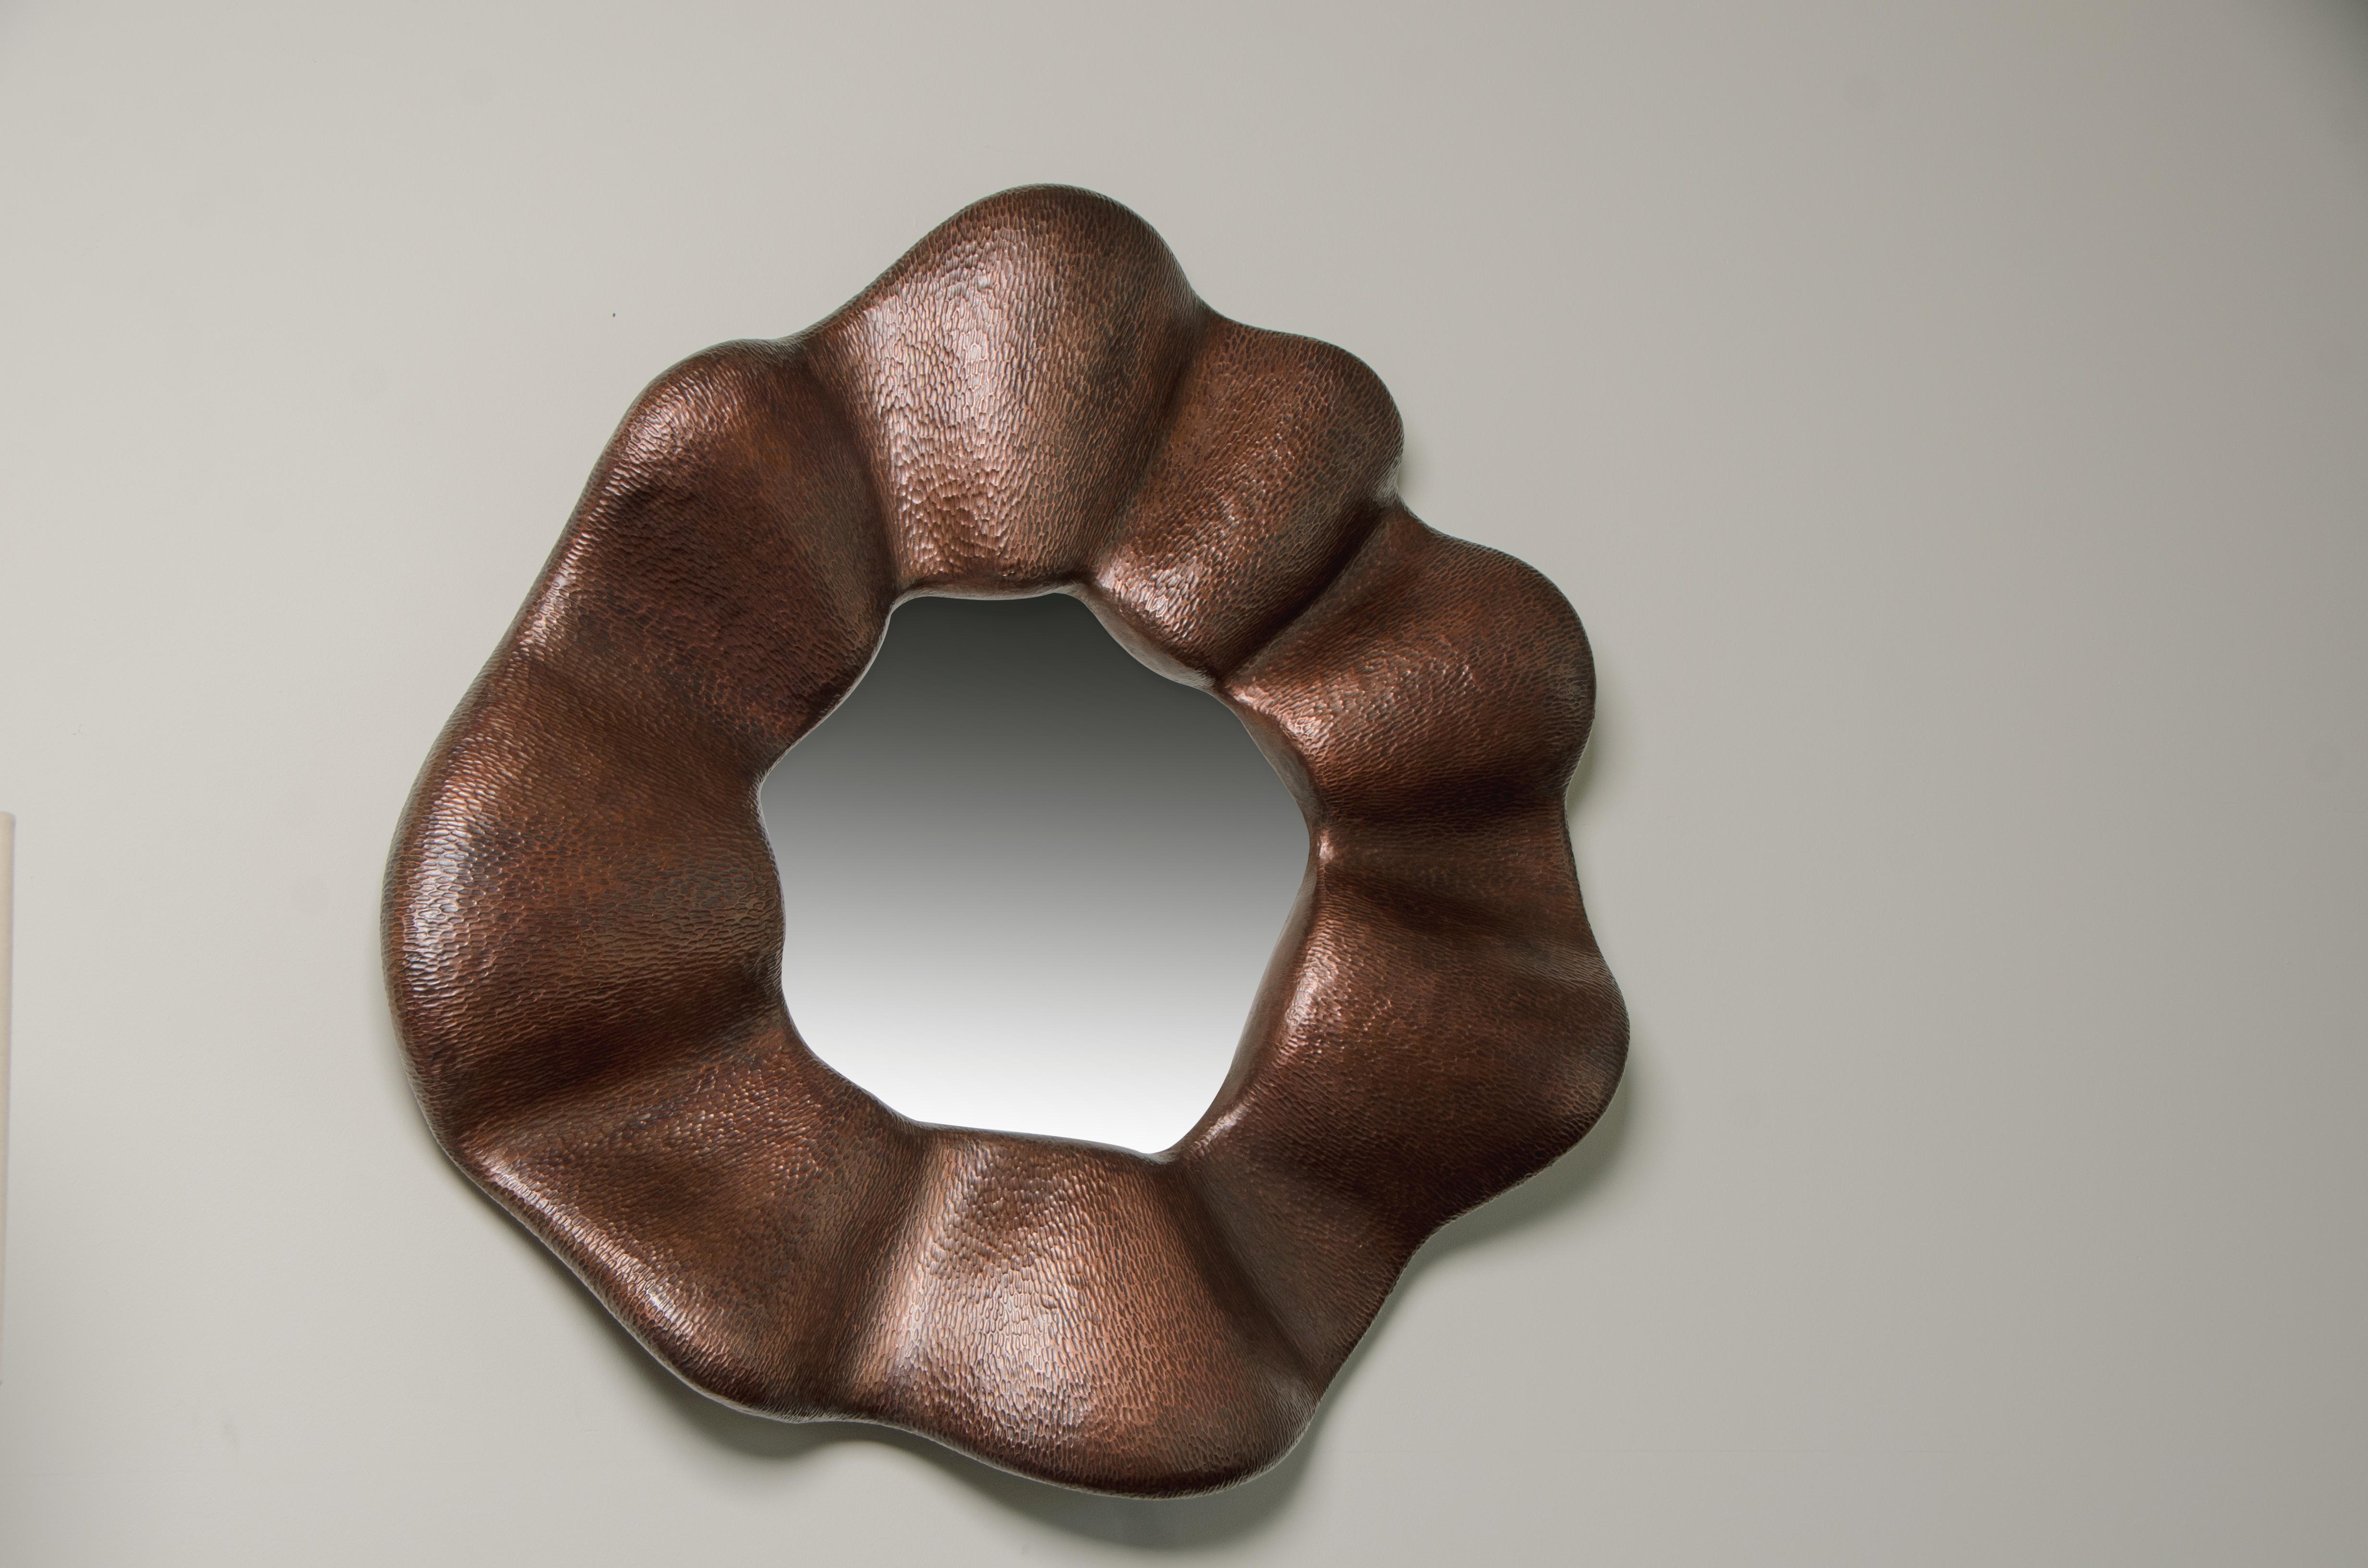 Modern Contemporary Ji Guan Mirror in Hand Repoussé Copper by Robert Kuo For Sale